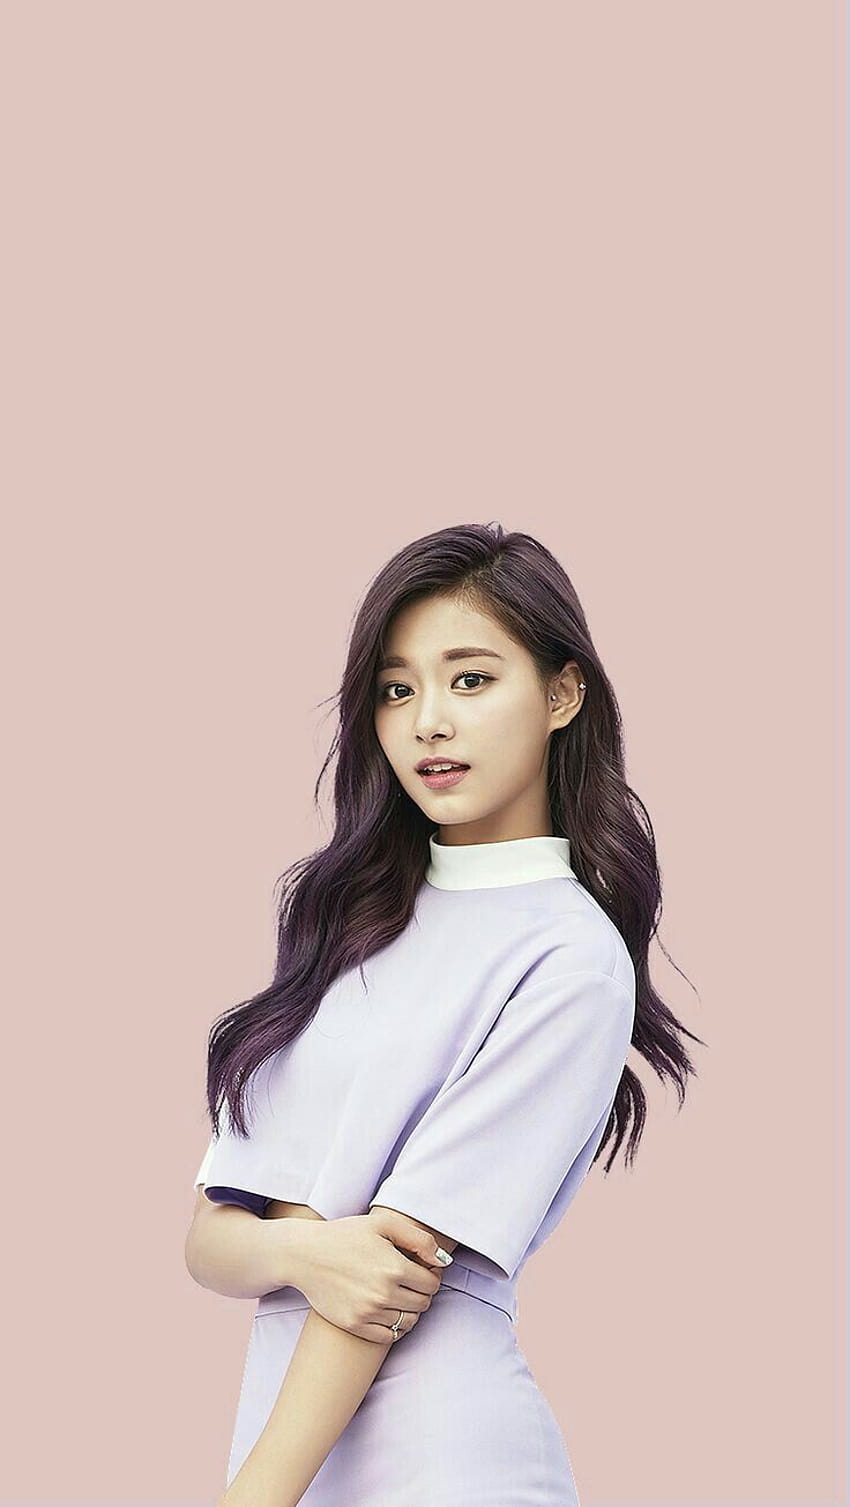 Twice Tzuyu posted by Michelle Anderson, tzuyu aesthetic HD phone wallpaper